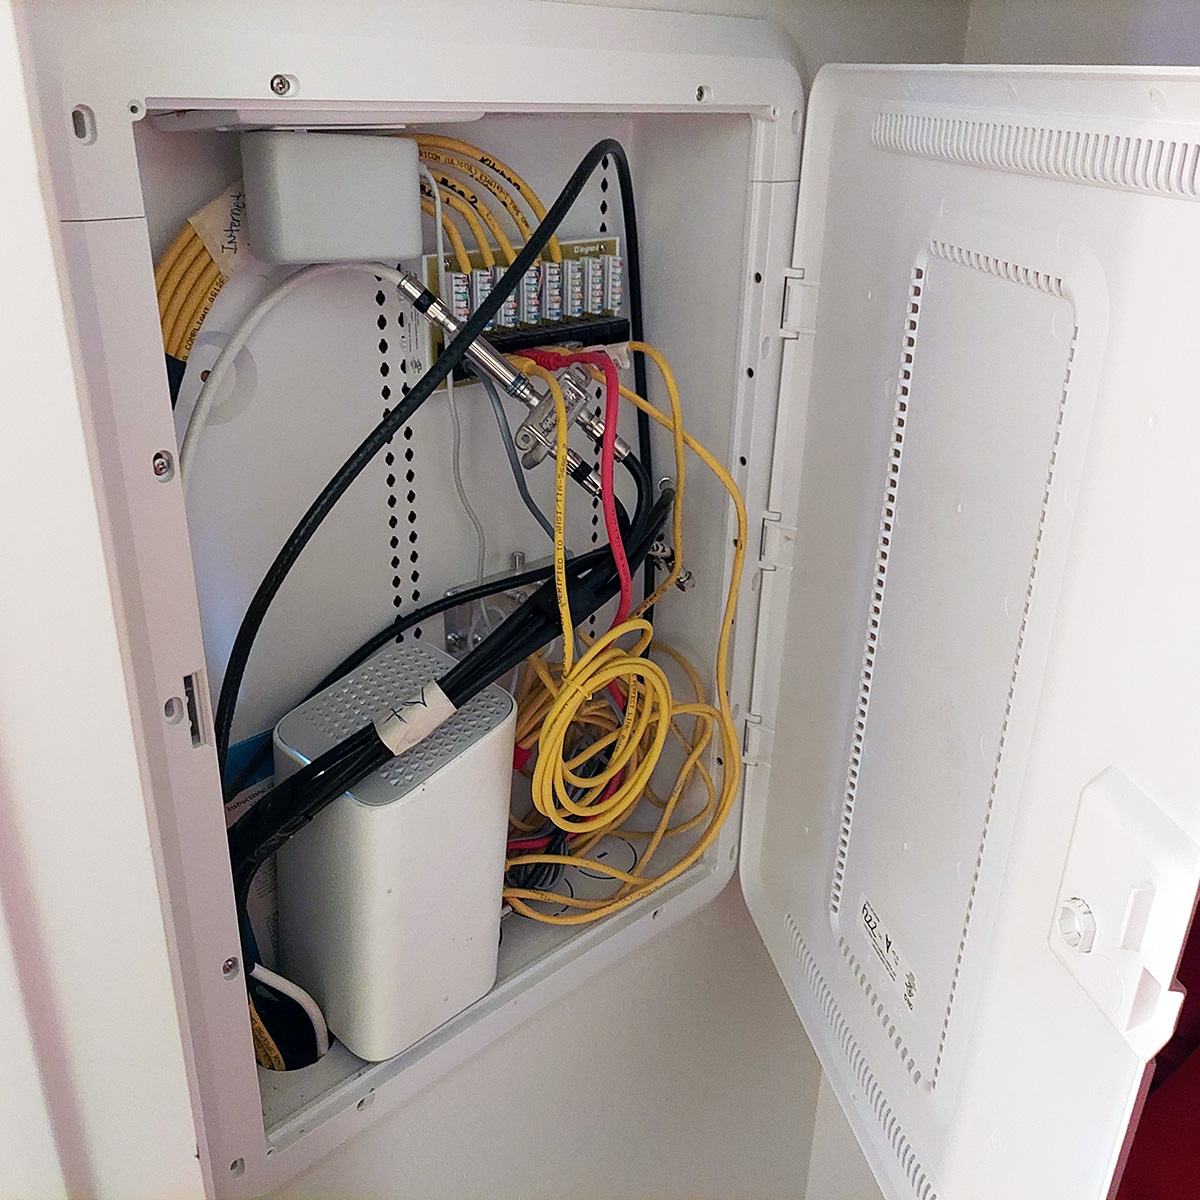 Lynstar helps clients to consolidate their wiring into one internet cabinet for their wifi, phone and other network connections